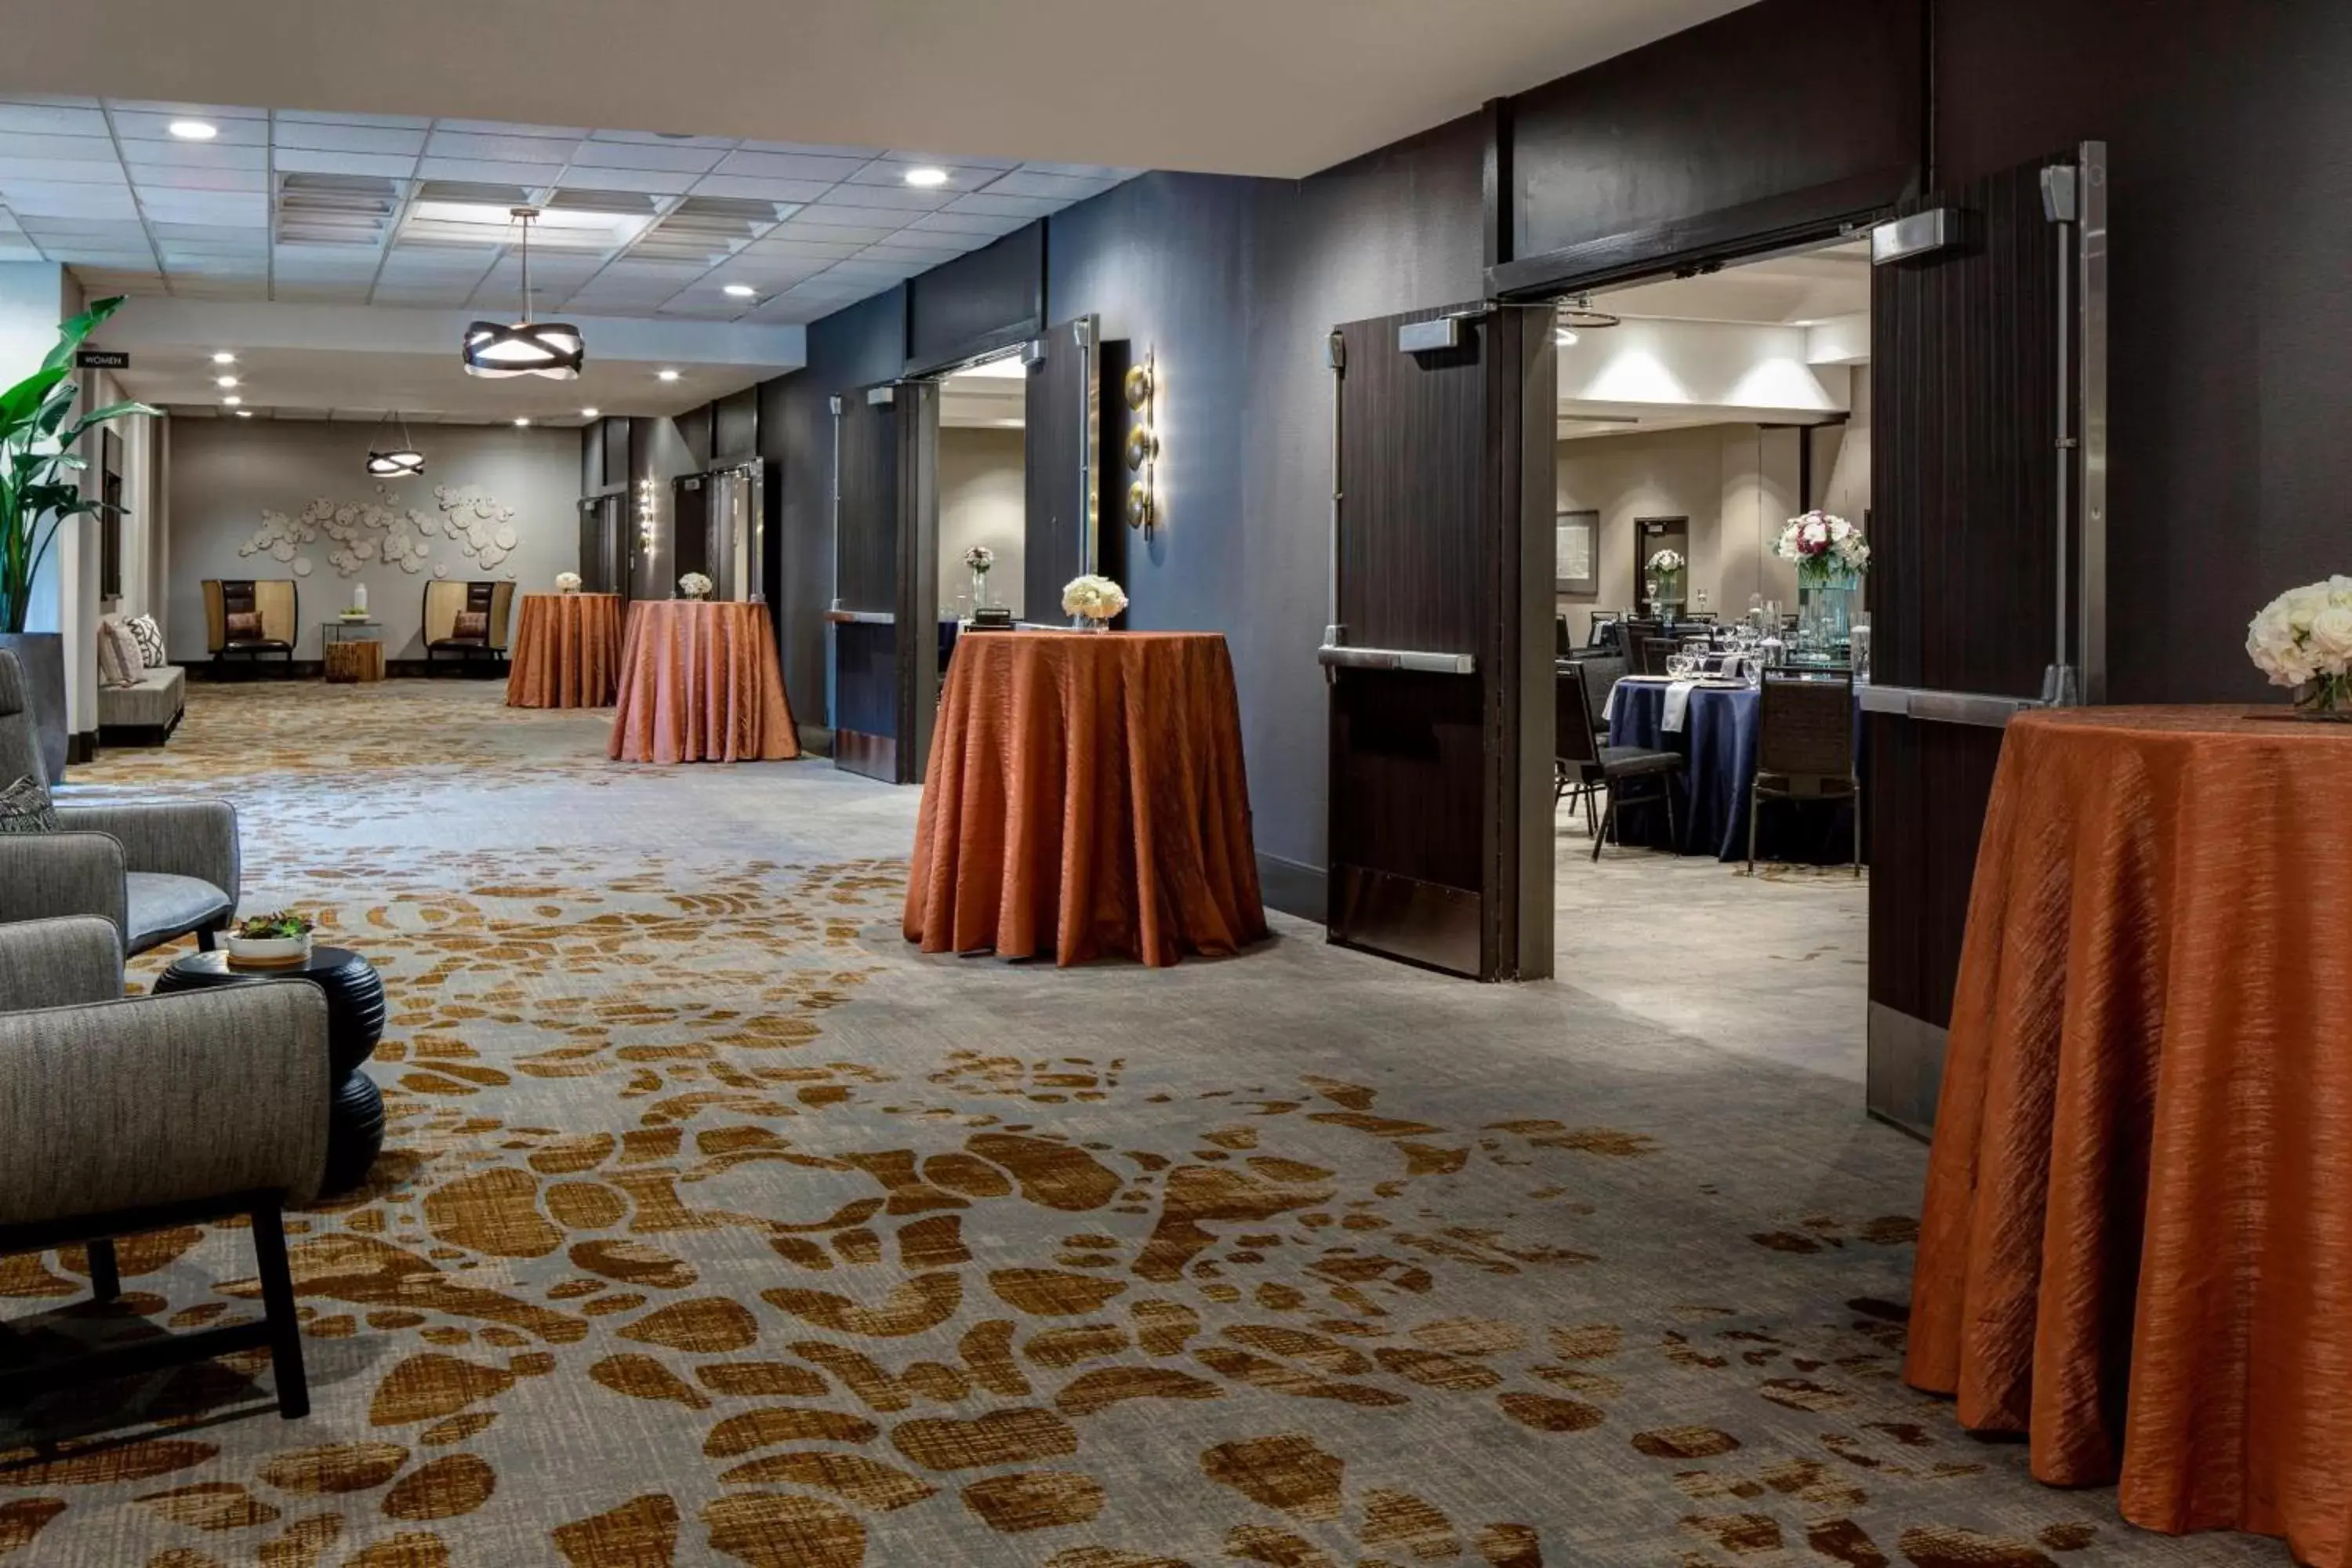 Meeting/conference room, Banquet Facilities in New York LaGuardia Airport Marriott